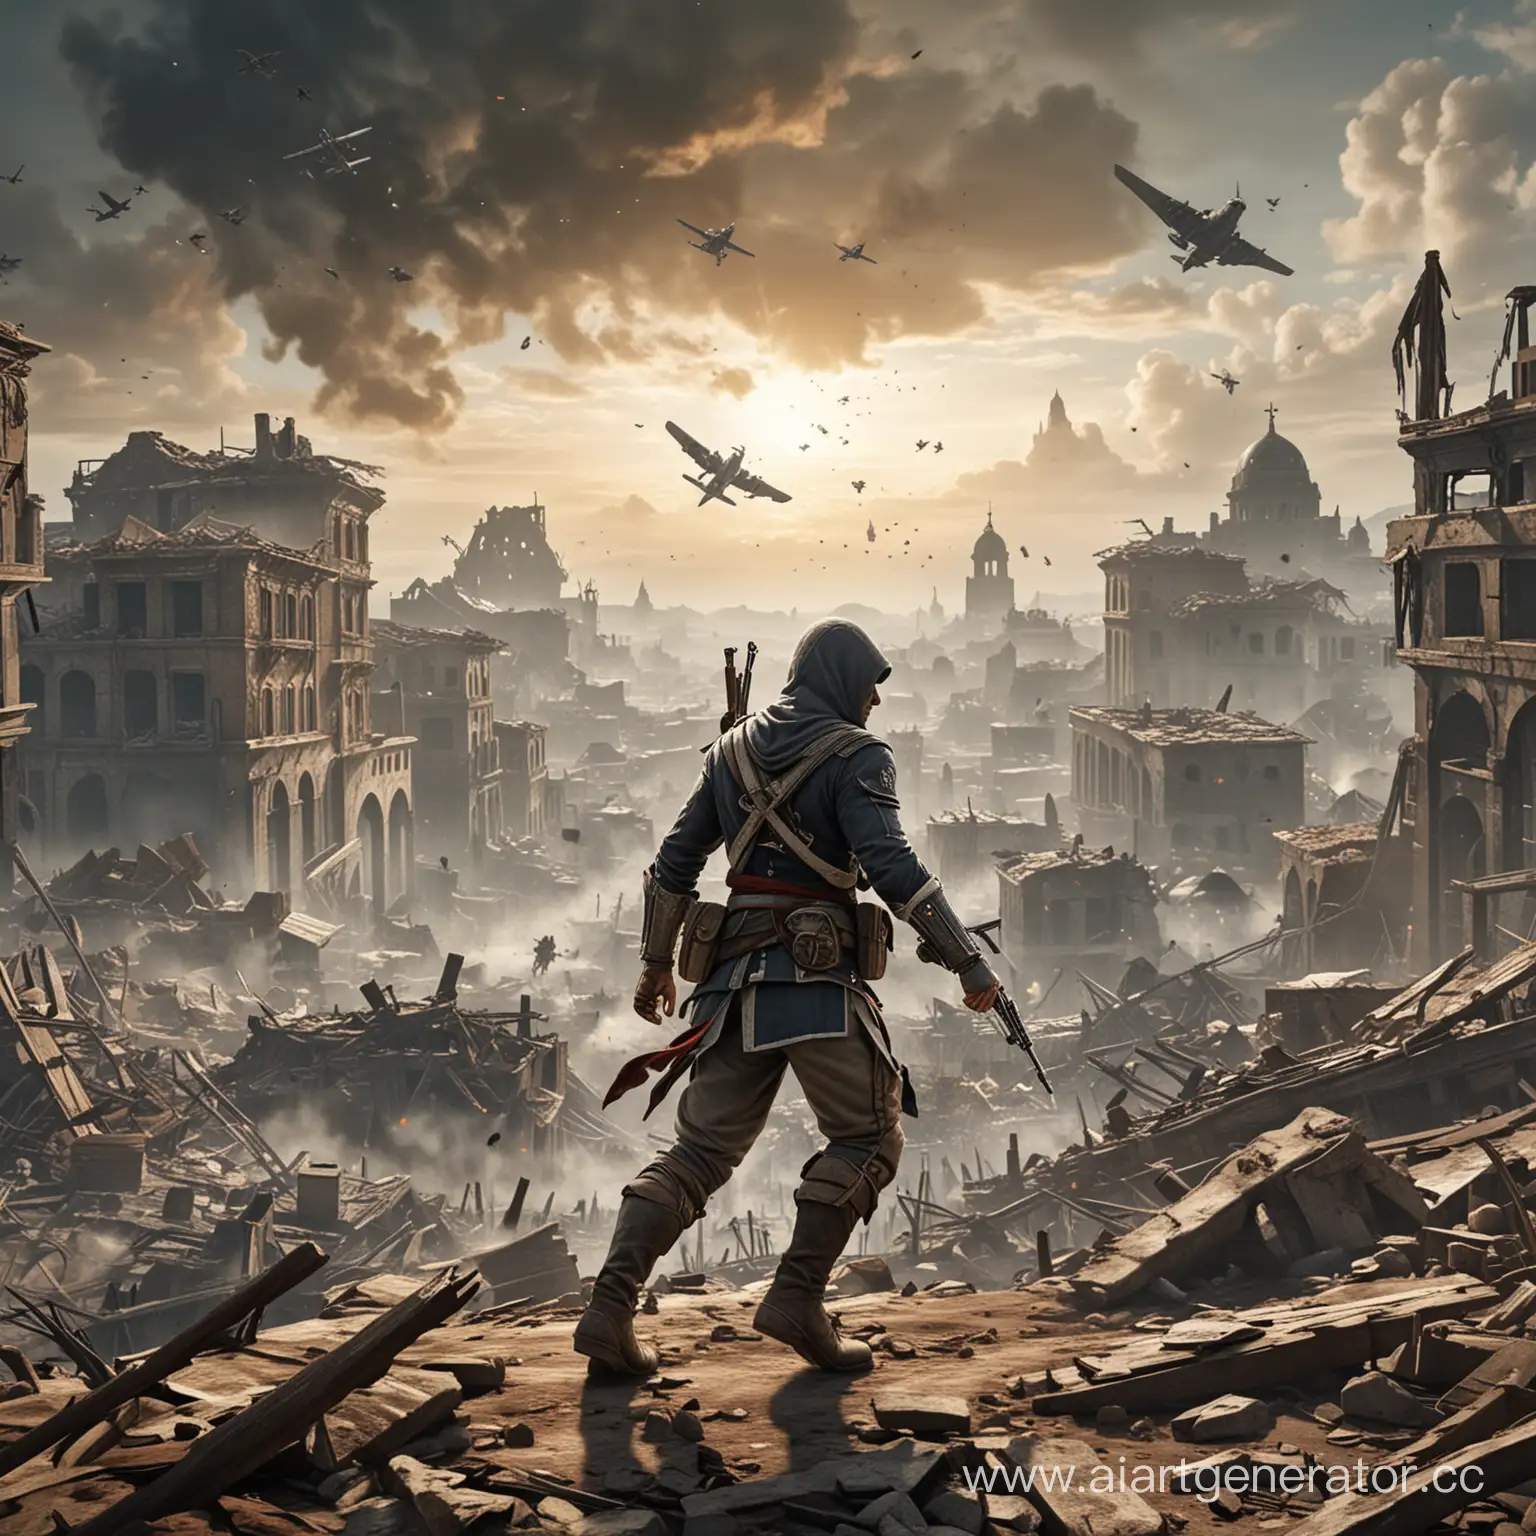 Assassins-Creed-Style-Character-Battles-Enemy-Soldier-in-1953-WarTorn-City-Amidst-German-Bombers